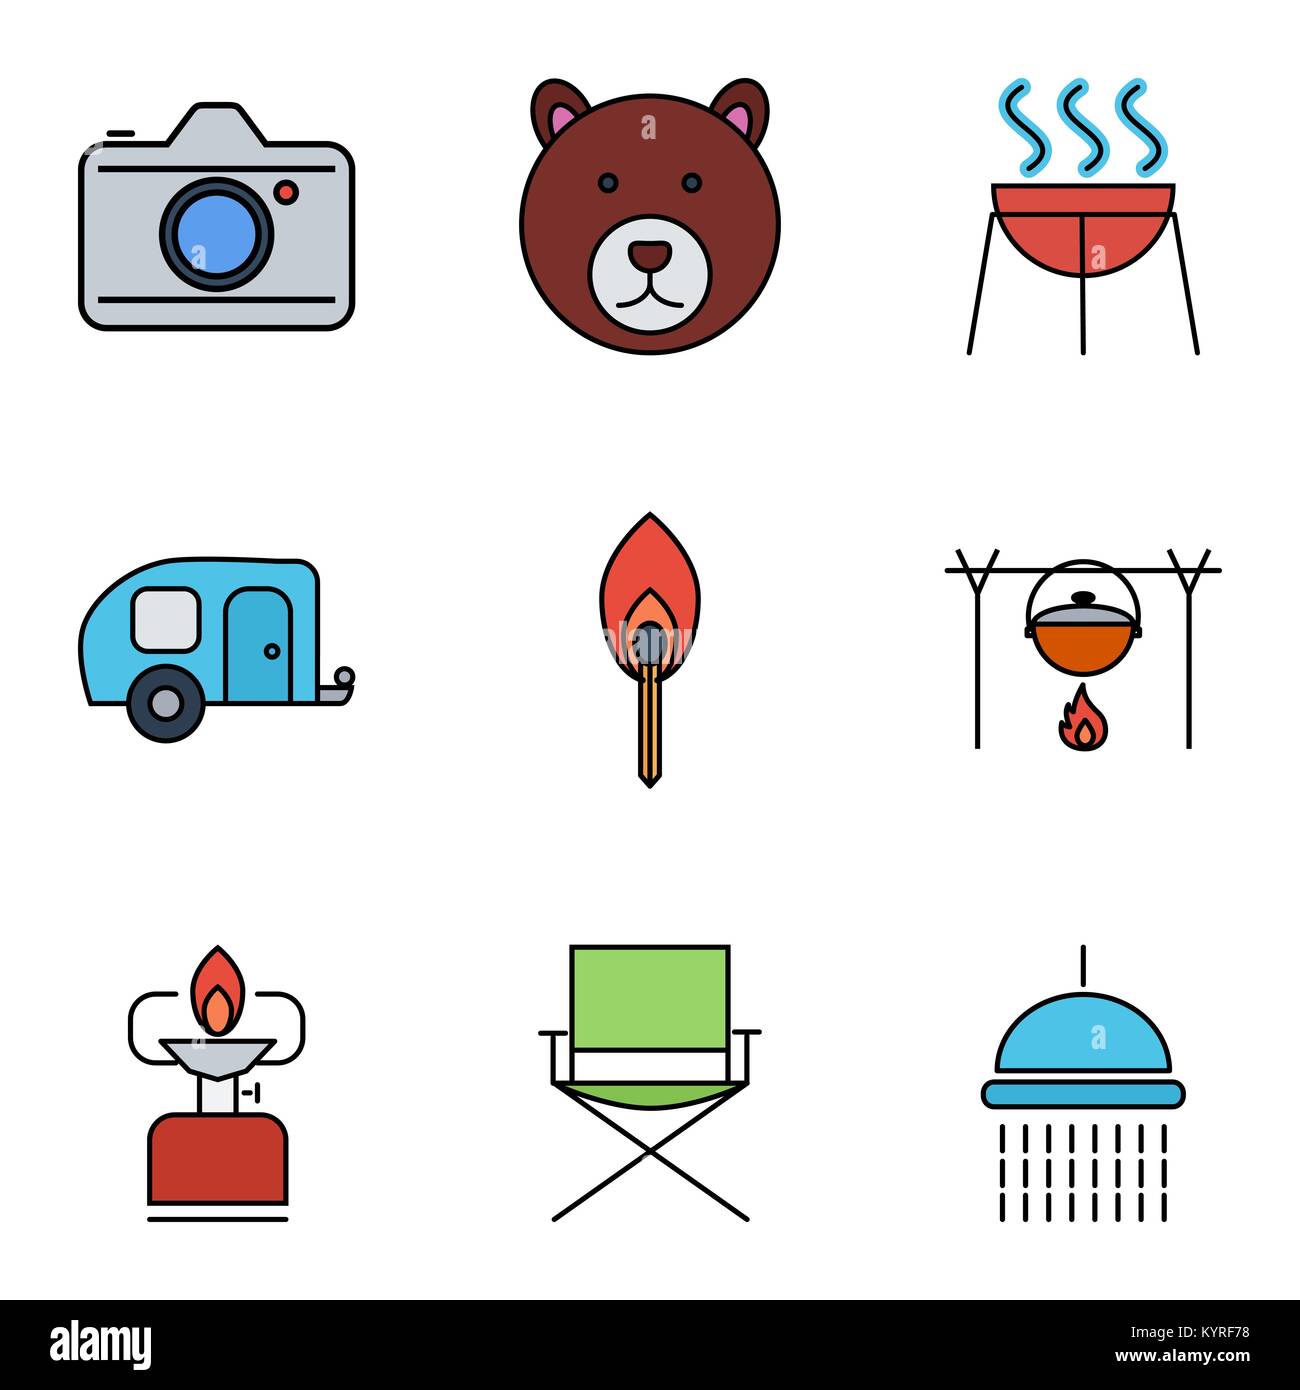 Camping flat vector icon set for web and mobile applications. Set includes - bear, camera, BBQ, trailer, match, pot, camping stove, chair, shower. It  Stock Vector